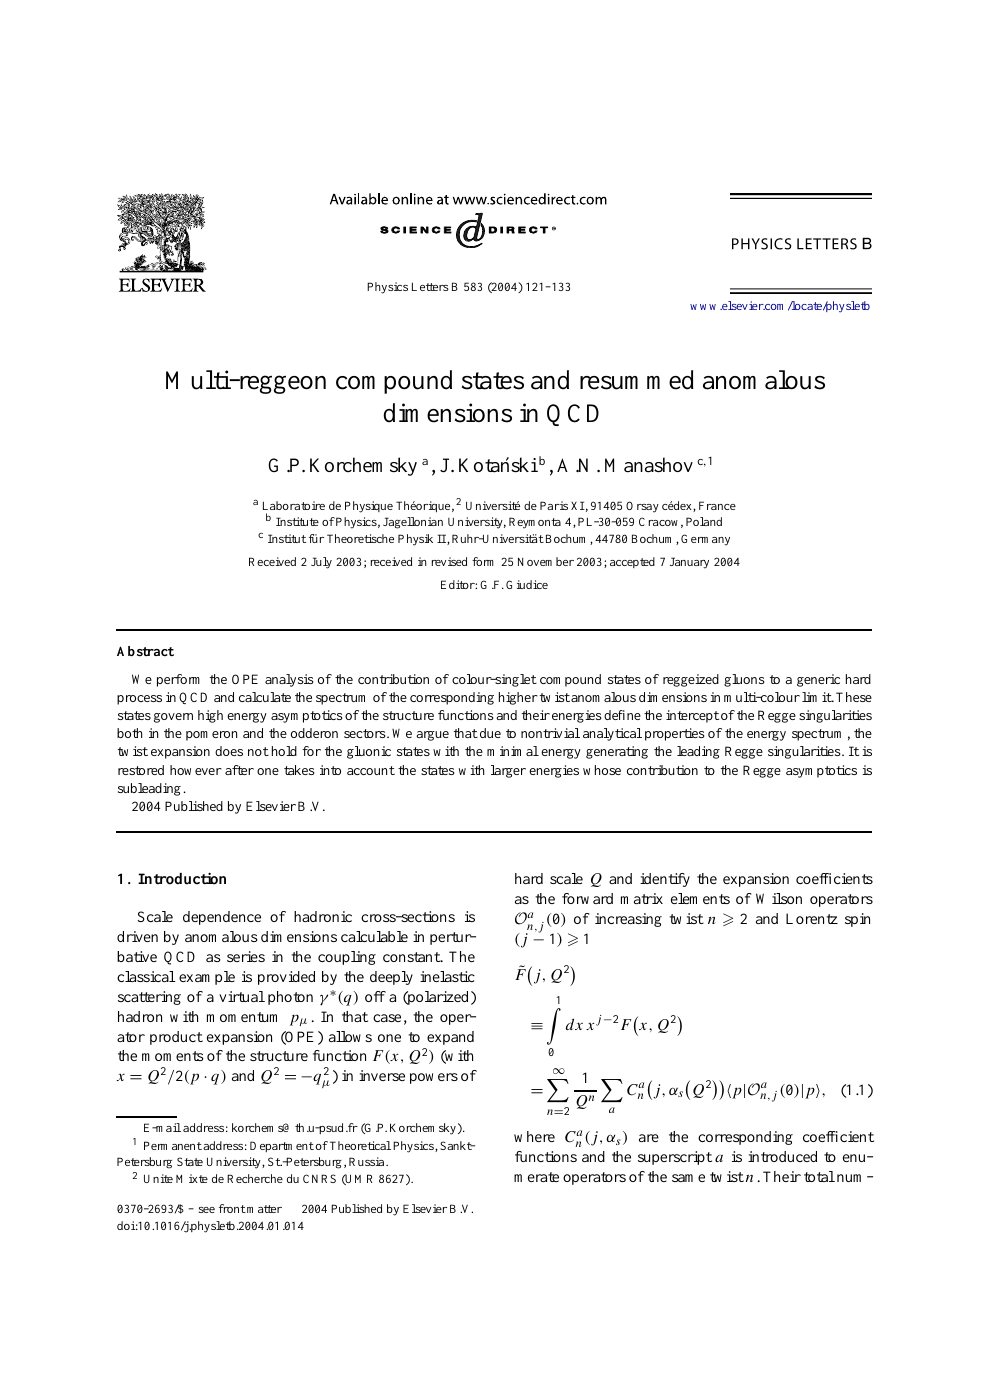 Multi Reggeon Compound States And Resummed Anomalous Dimensions In Qcd Topic Of Research Paper In Physical Sciences Download Scholarly Article Pdf And Read For Free On Cyberleninka Open Science Hub